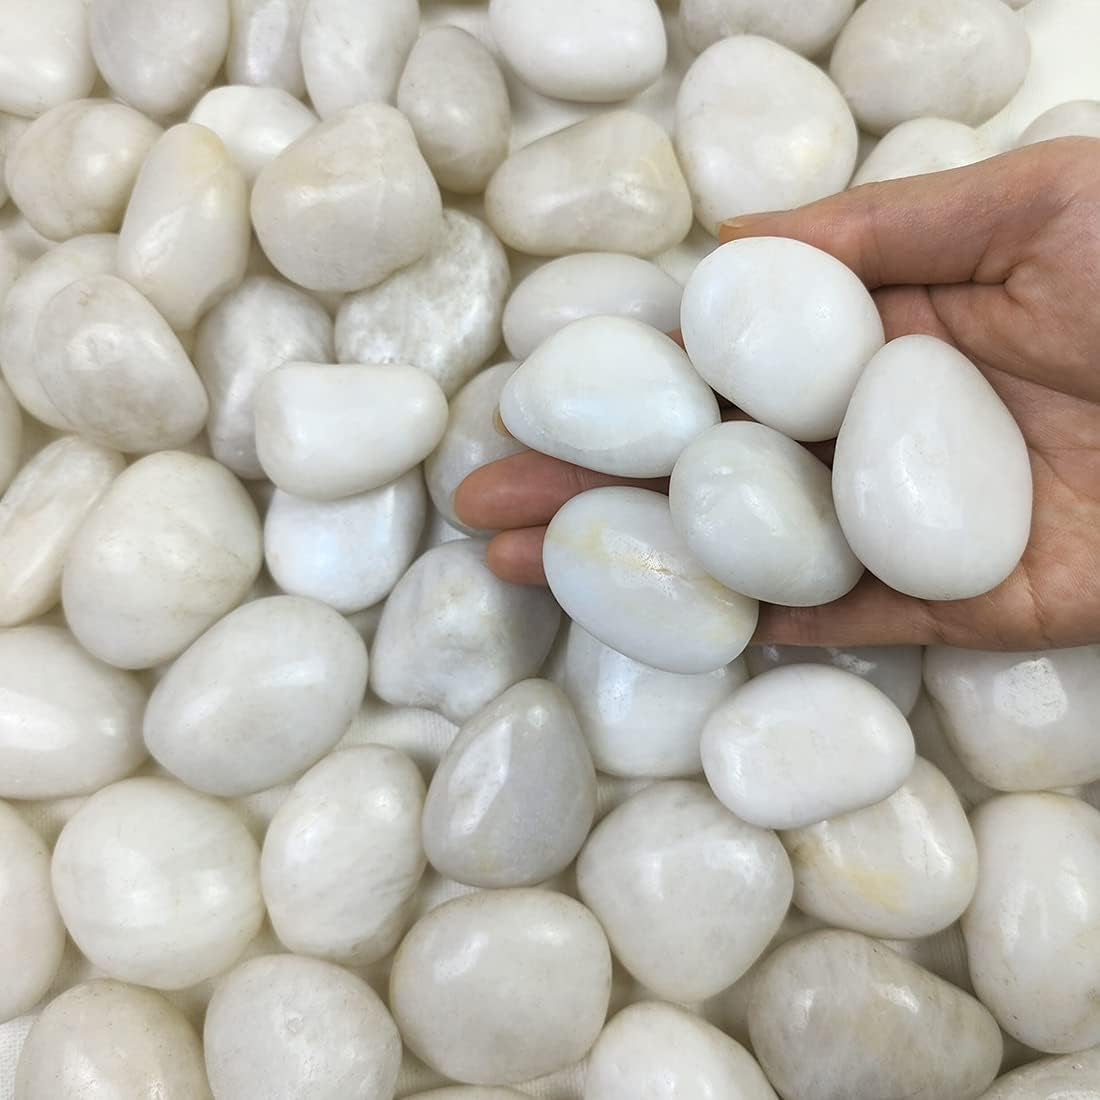 10Lbs White Pebbles for Indoor Plants, 0.8-1.2 Inch Small White River Rocks Stones for Planters, Vases, Garden, Landscaping, Top Dressing and Plant Bottem Drainage